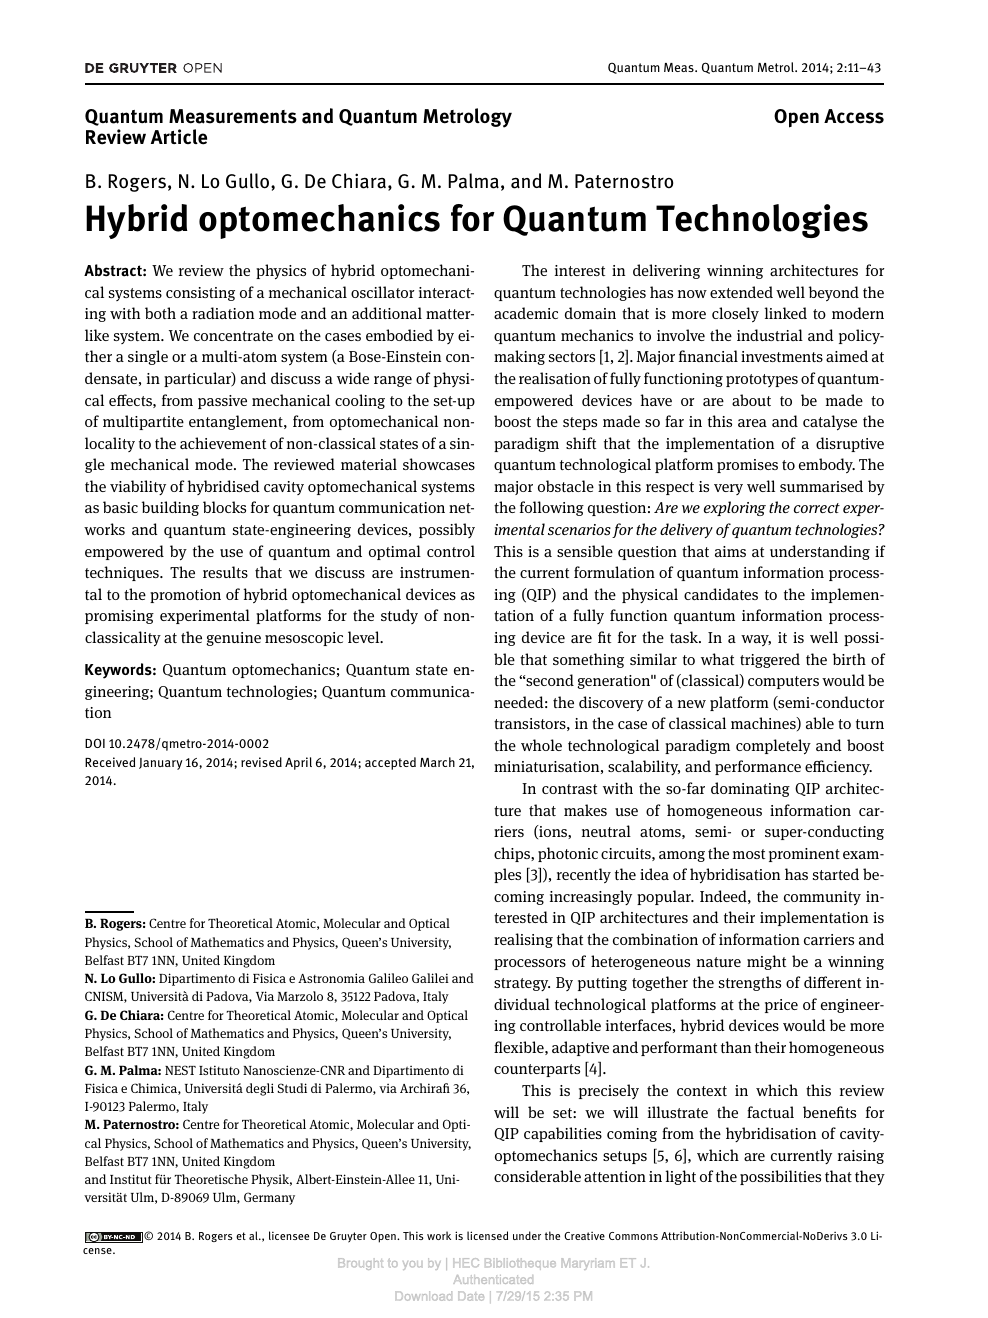 Hybrid Optomechanics For Quantum Technologies Topic Of Research Paper In Physical Sciences Download Scholarly Article Pdf And Read For Free On Cyberleninka Open Science Hub